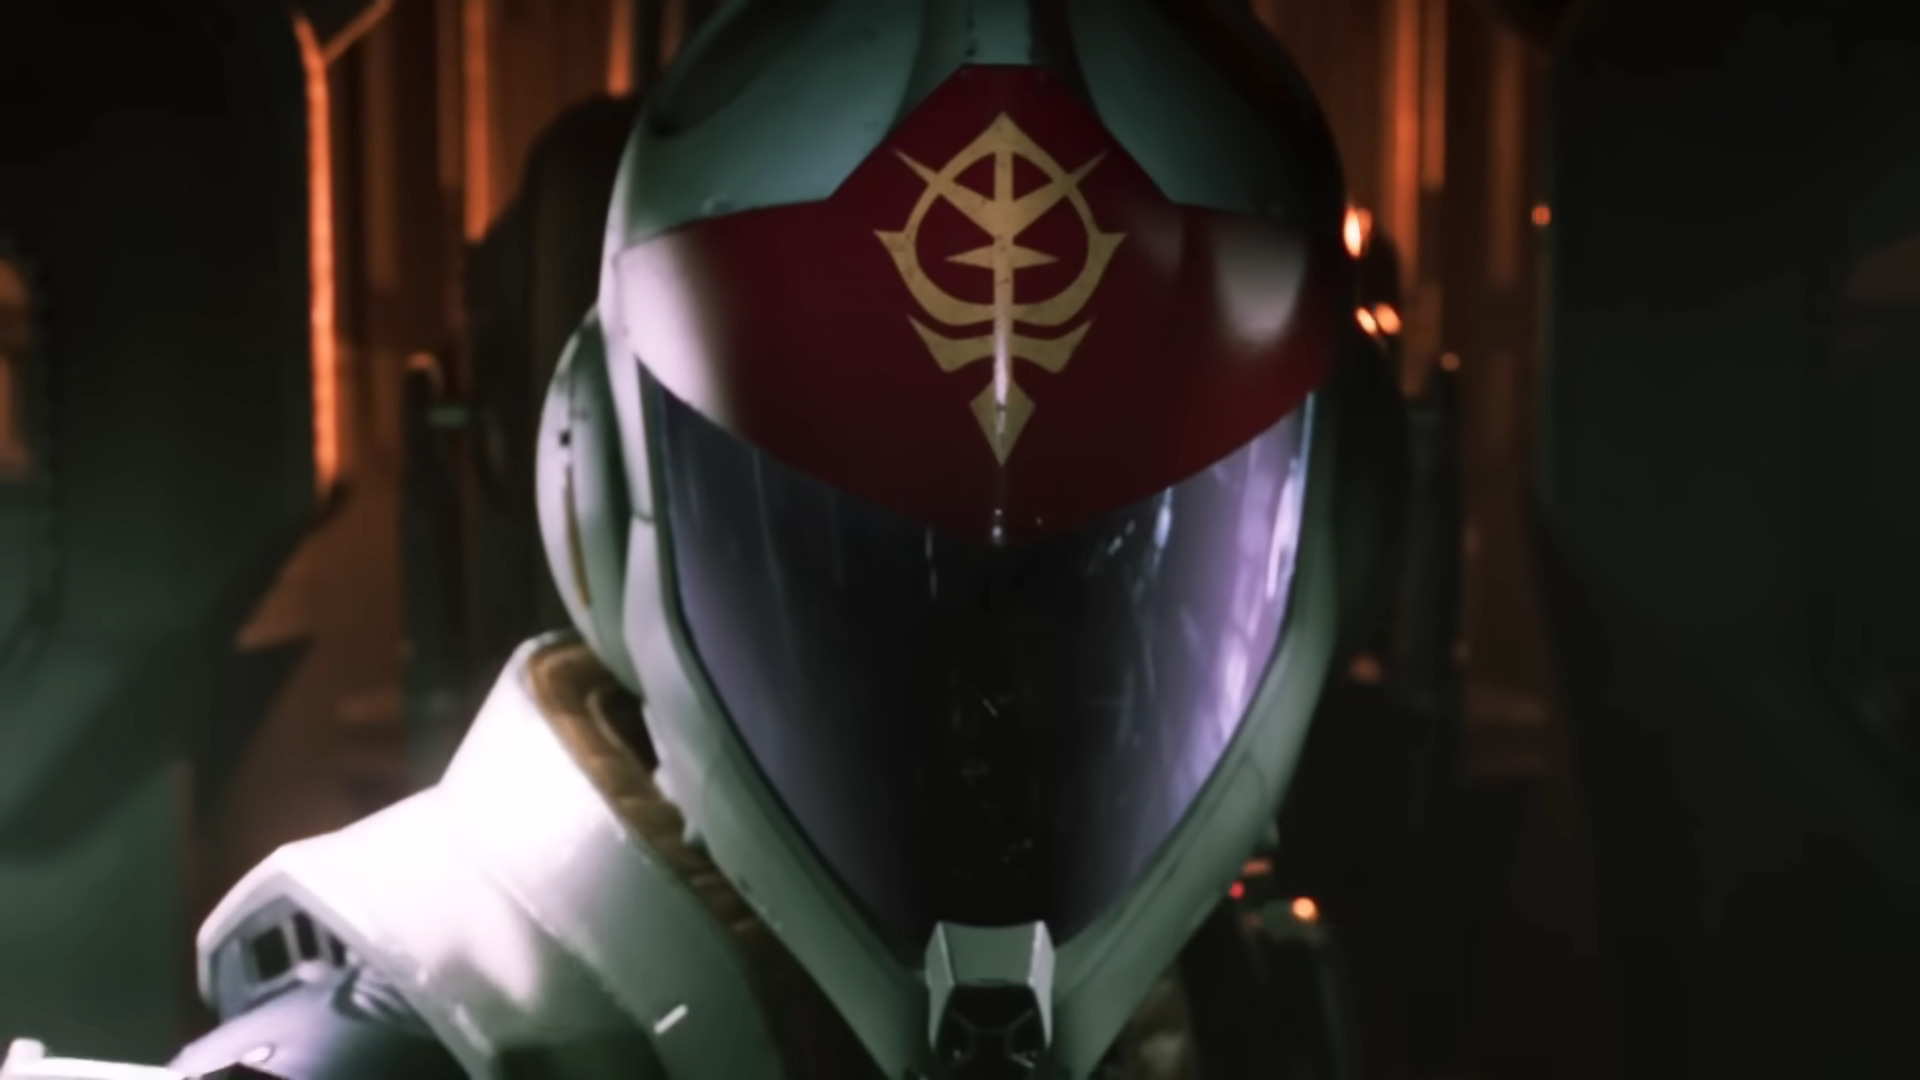 A Zeon soldier prepares for battle in the first teaser for Mobile Suit Gundam: Requiem for Vengeance